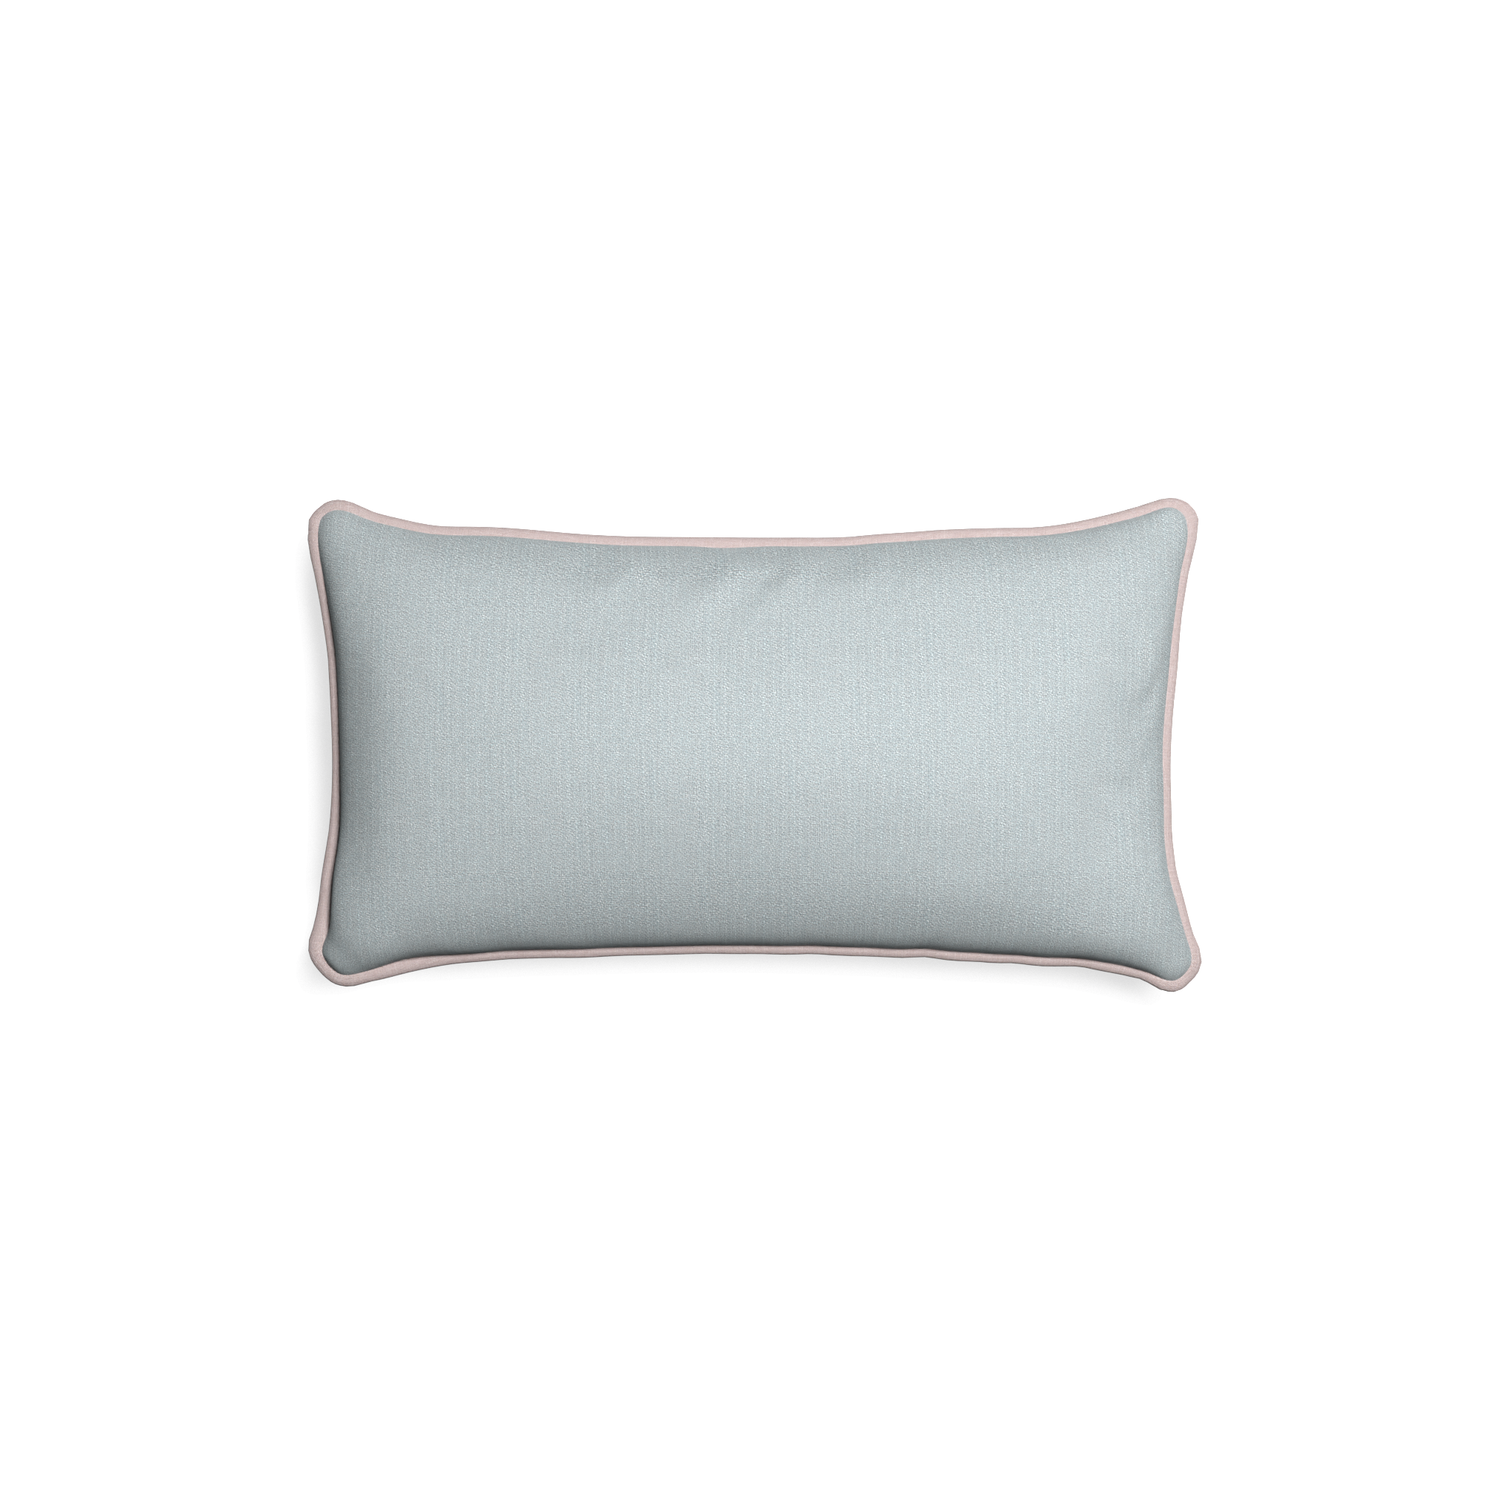 Petite-lumbar sea custom grey bluepillow with orchid piping on white background